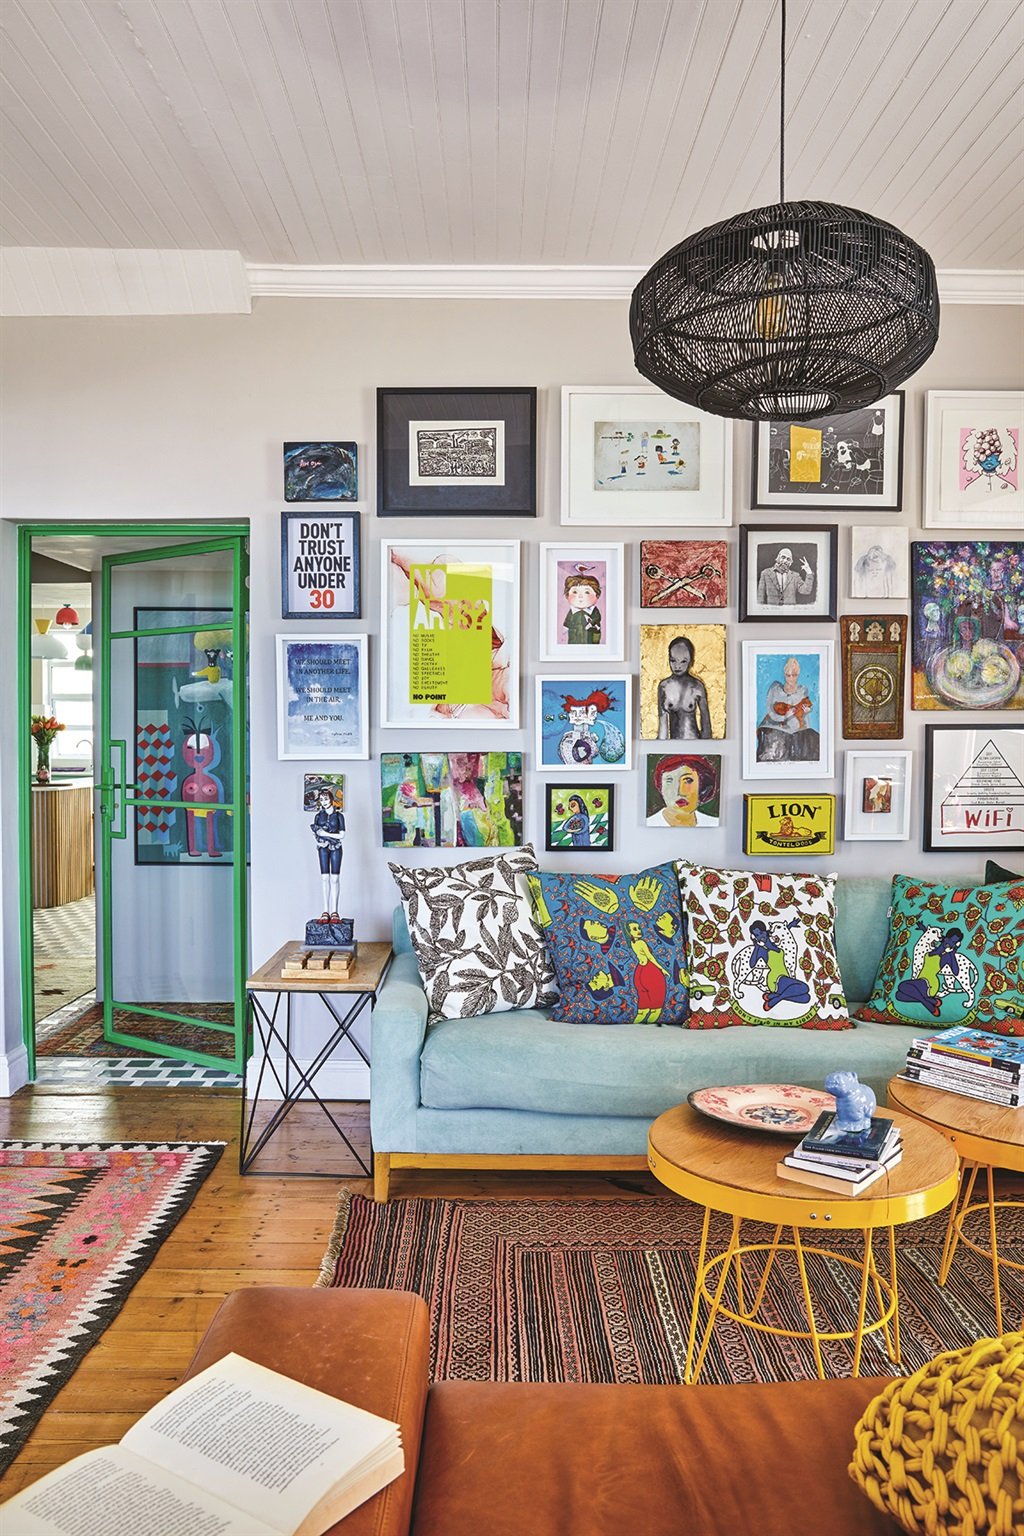 One of the colourful rooms in the Gauteng couple's home. Photo: Greg Cox 